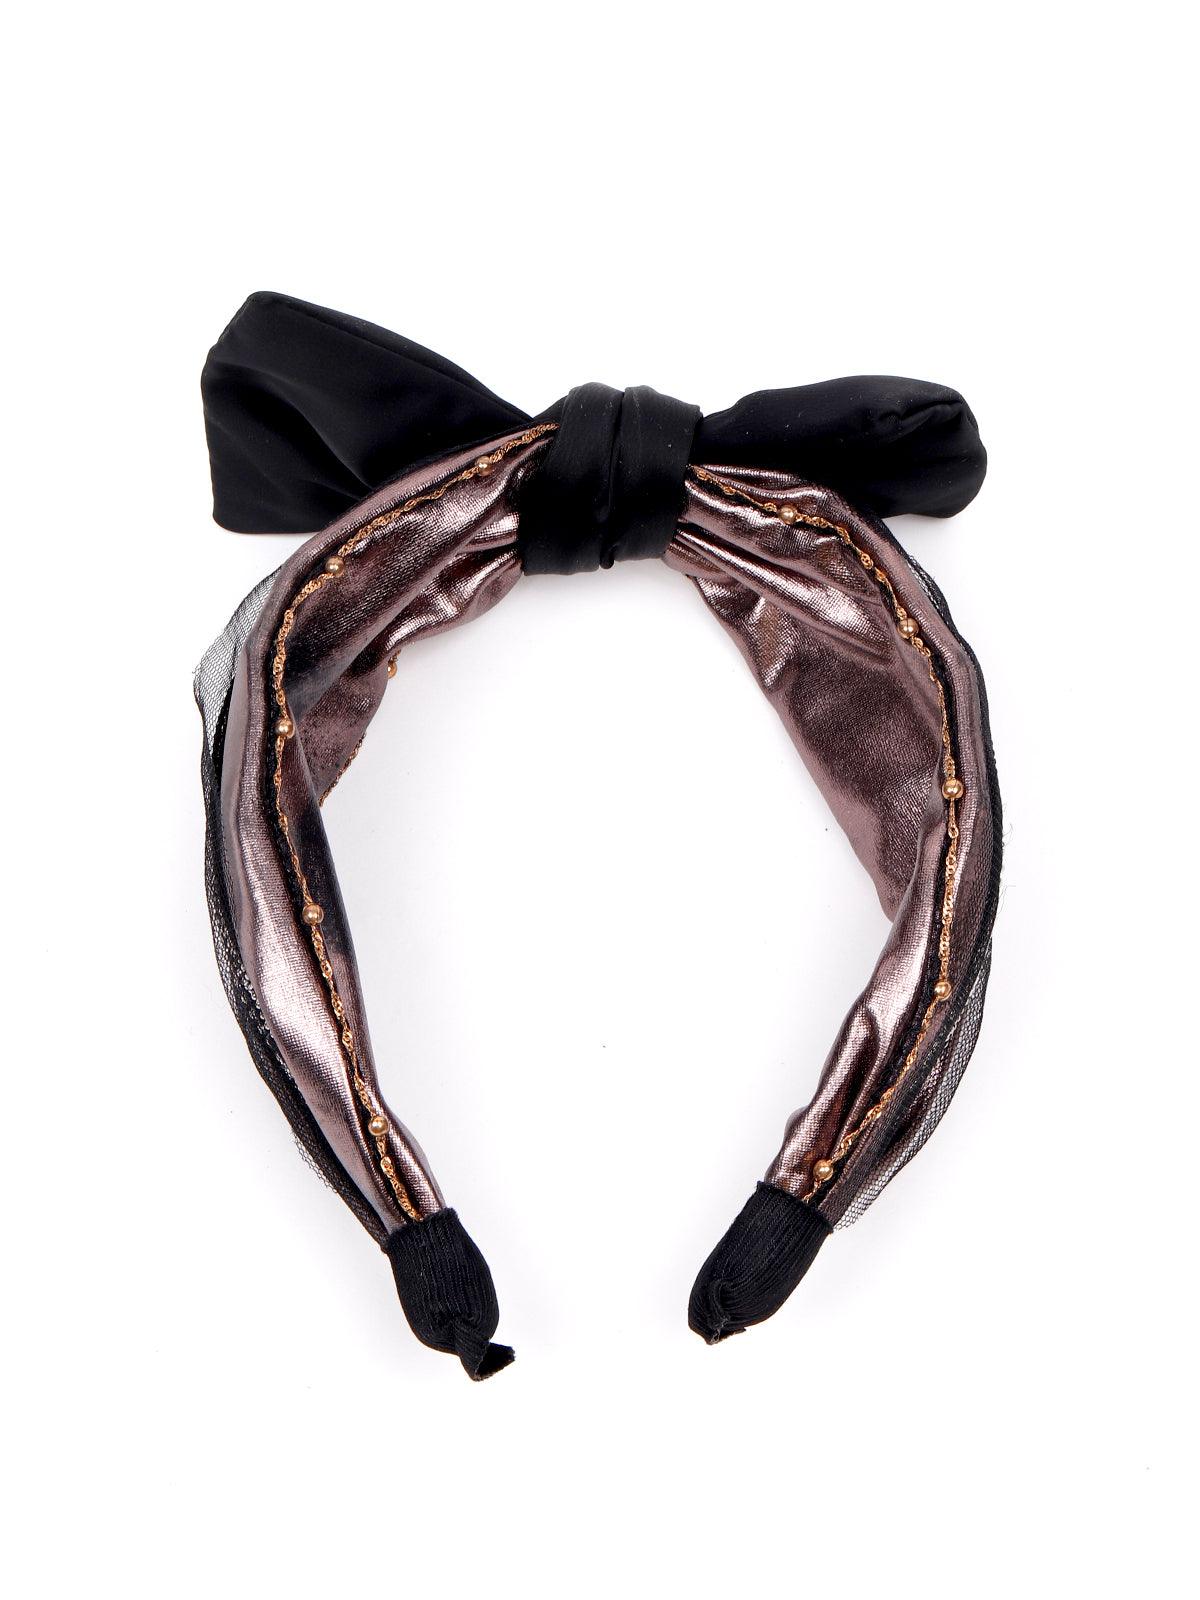 Gorgeous metallic hairband with a bow - Odette